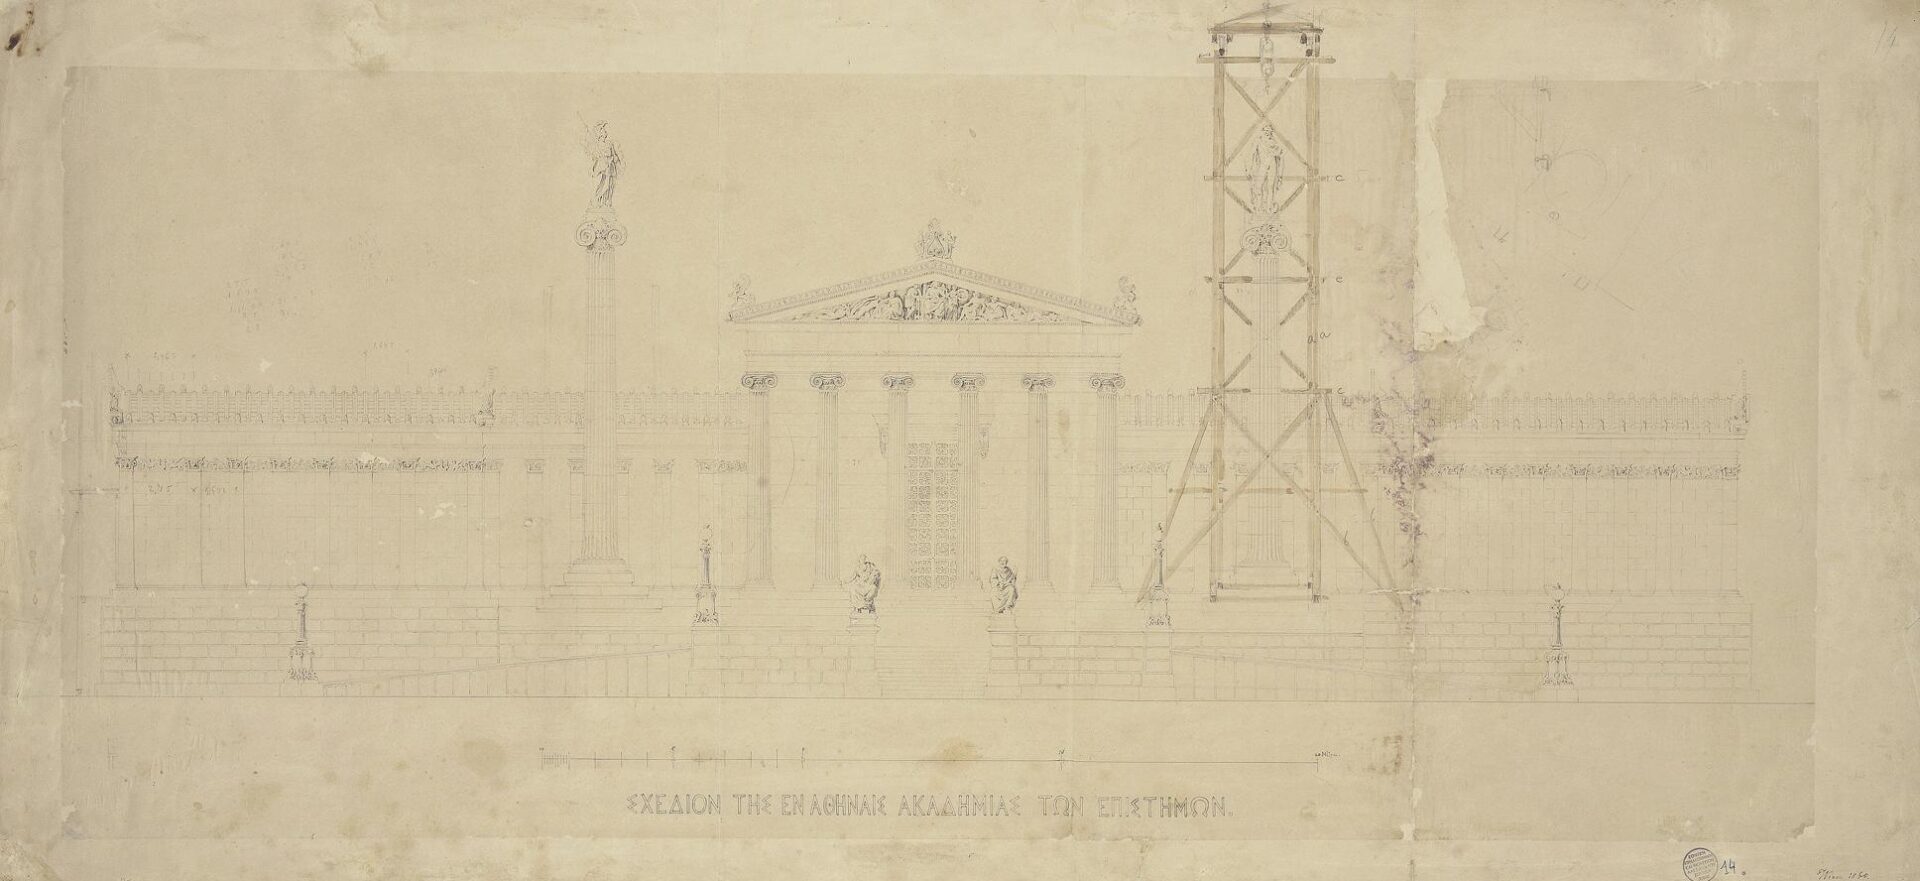 Academy of Sciences, Sina Academy. Main Facade with Indication on the Scaffolding for the Placement of the Statue of Apollo by Leonidas Drossis (1882] - Ziller Ernst